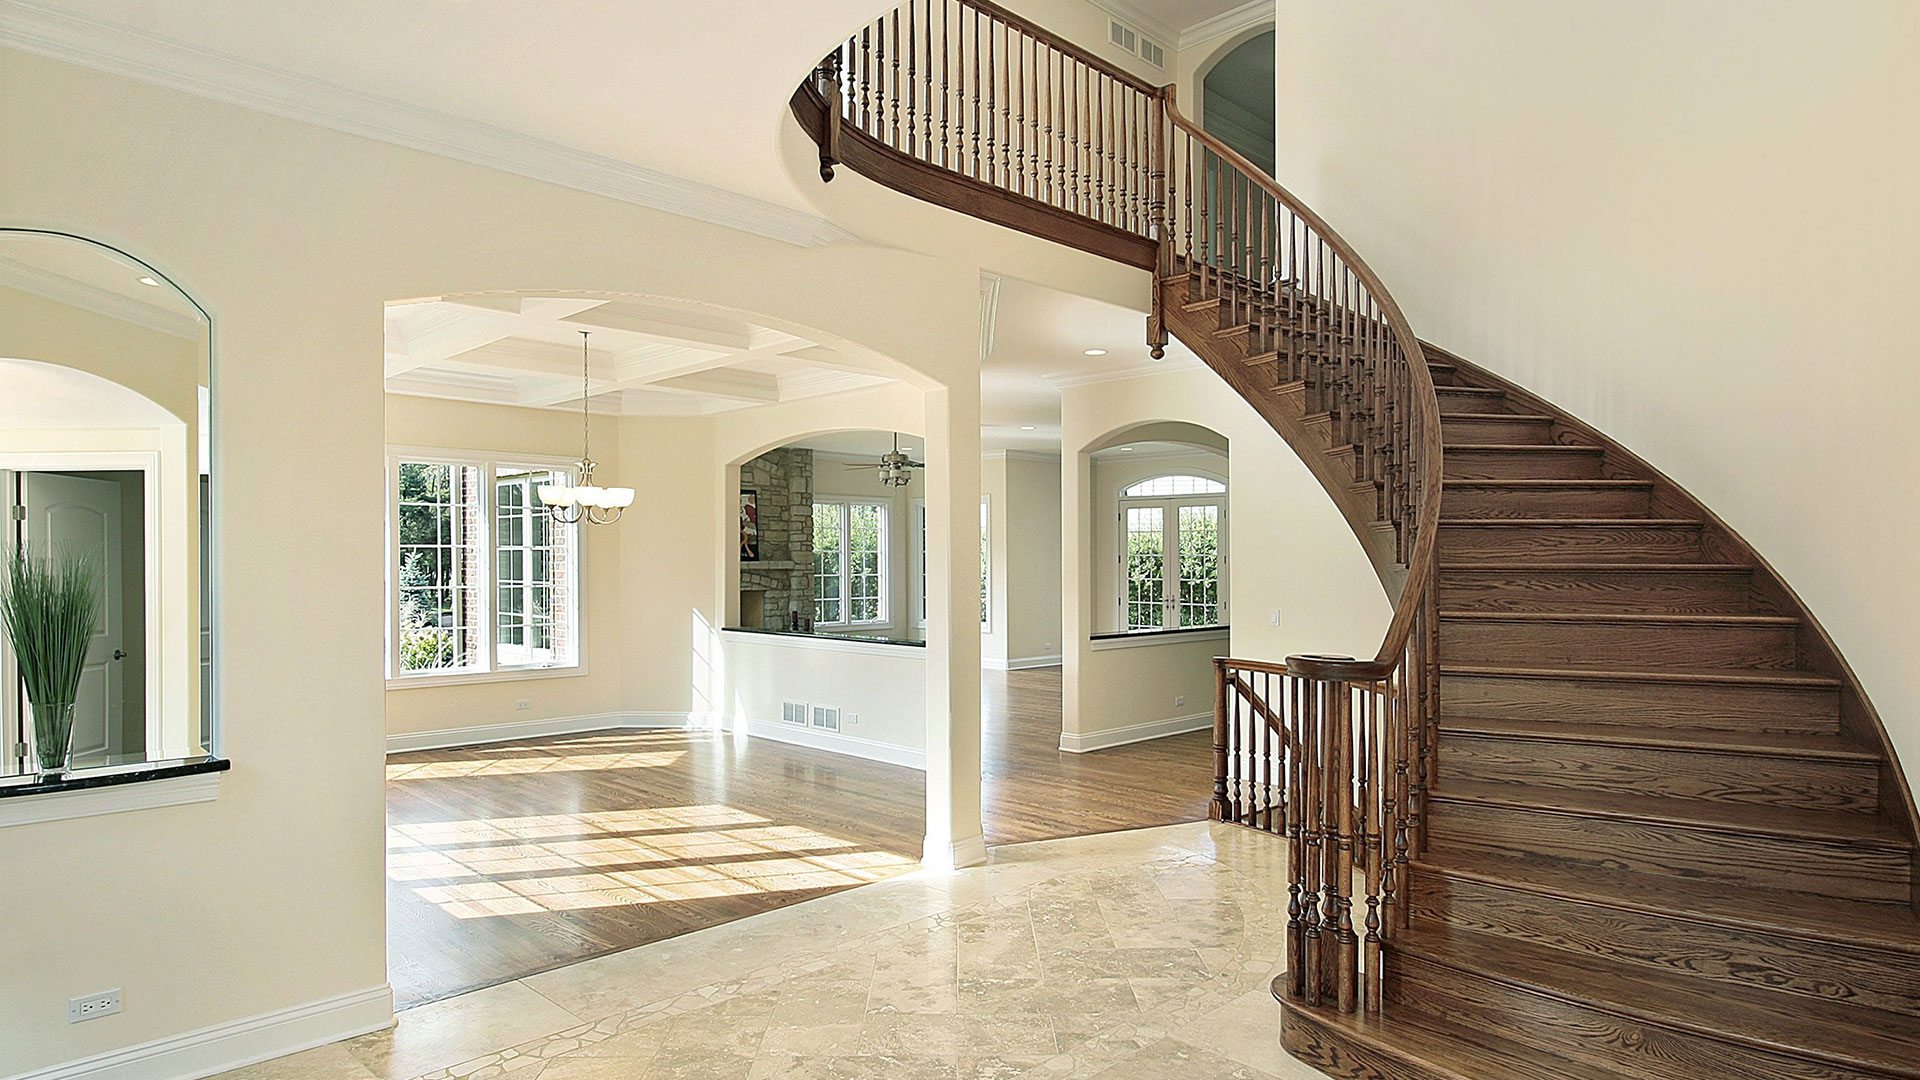 Newly Remodeled Home Spiraled Staircase - remodel contractor